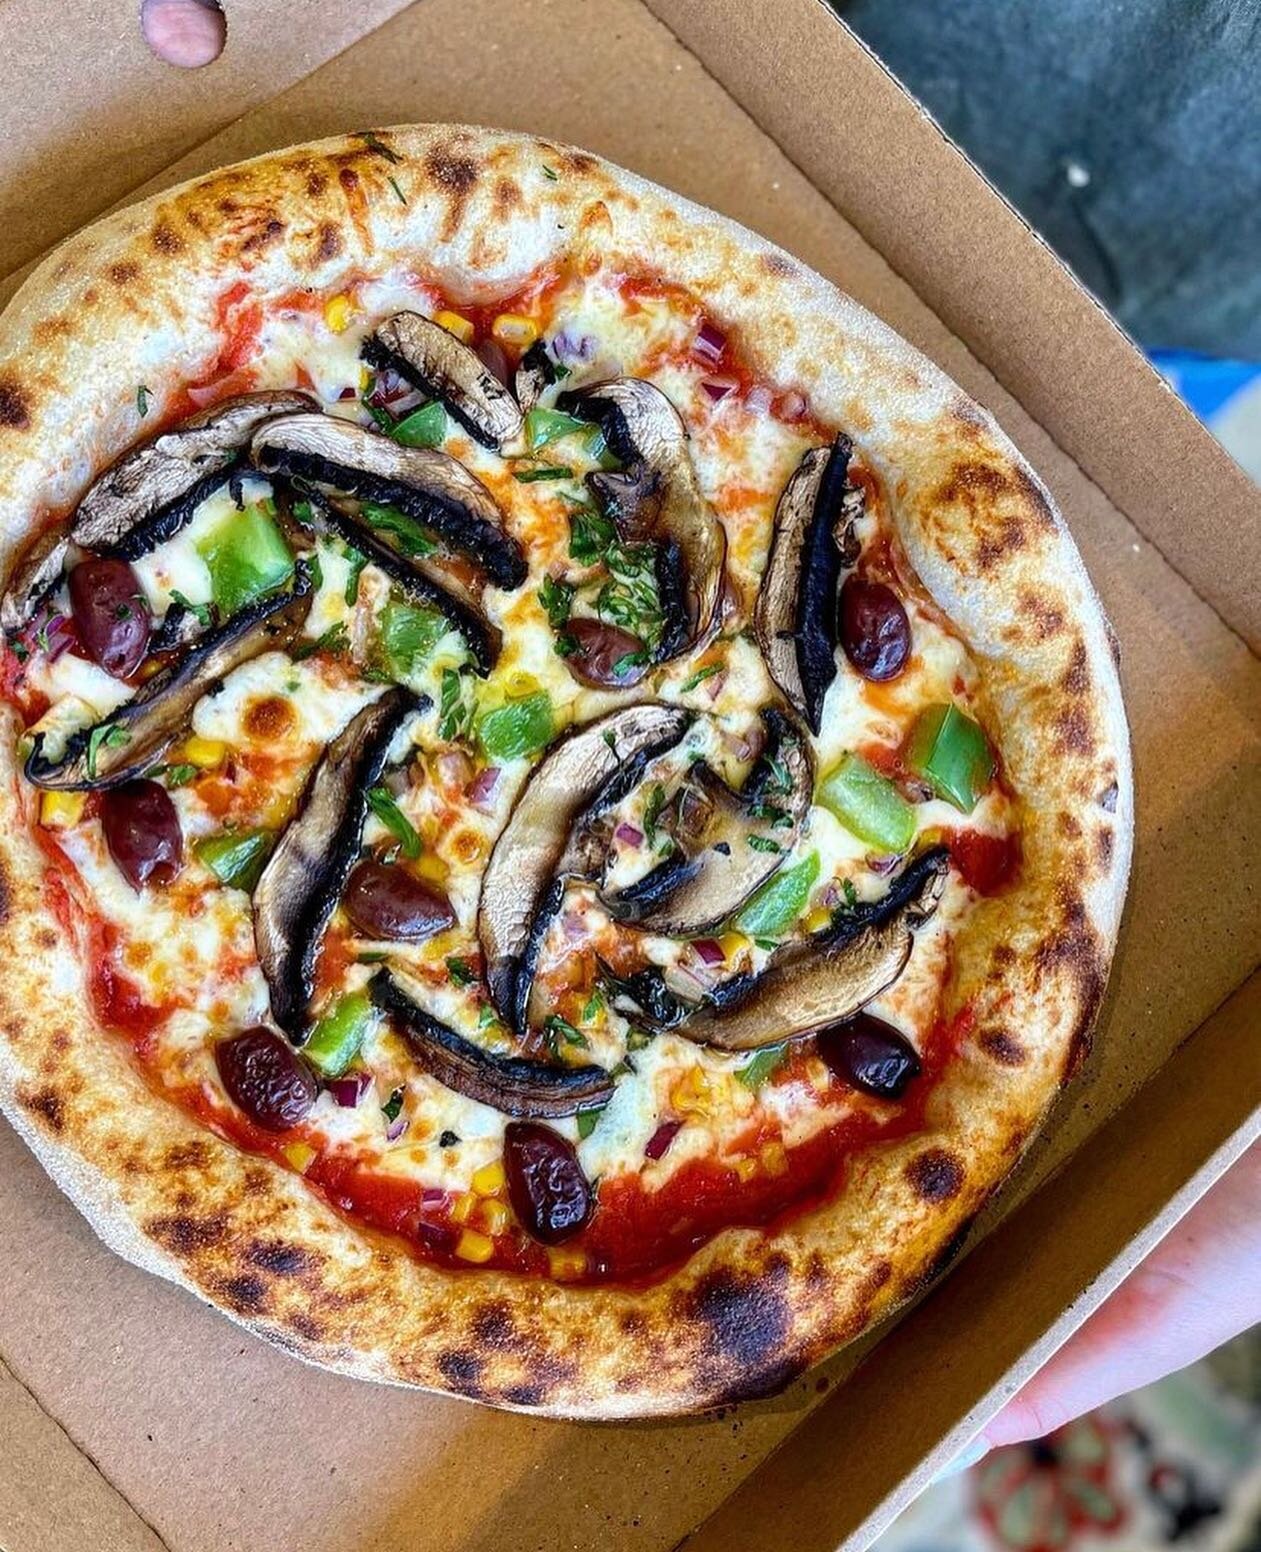 Pizza, you&rsquo;re the best thing that&rsquo;s happened since sliced bread. 😉 Call now to reserve your Friday night pizza. 🍕 Limited quantities! Pick-ups from 5pm-8pm. SWIPE for tonight&rsquo;s menu. 🤤 #sourdoughrevolution #sourdoughpizza #cotsow